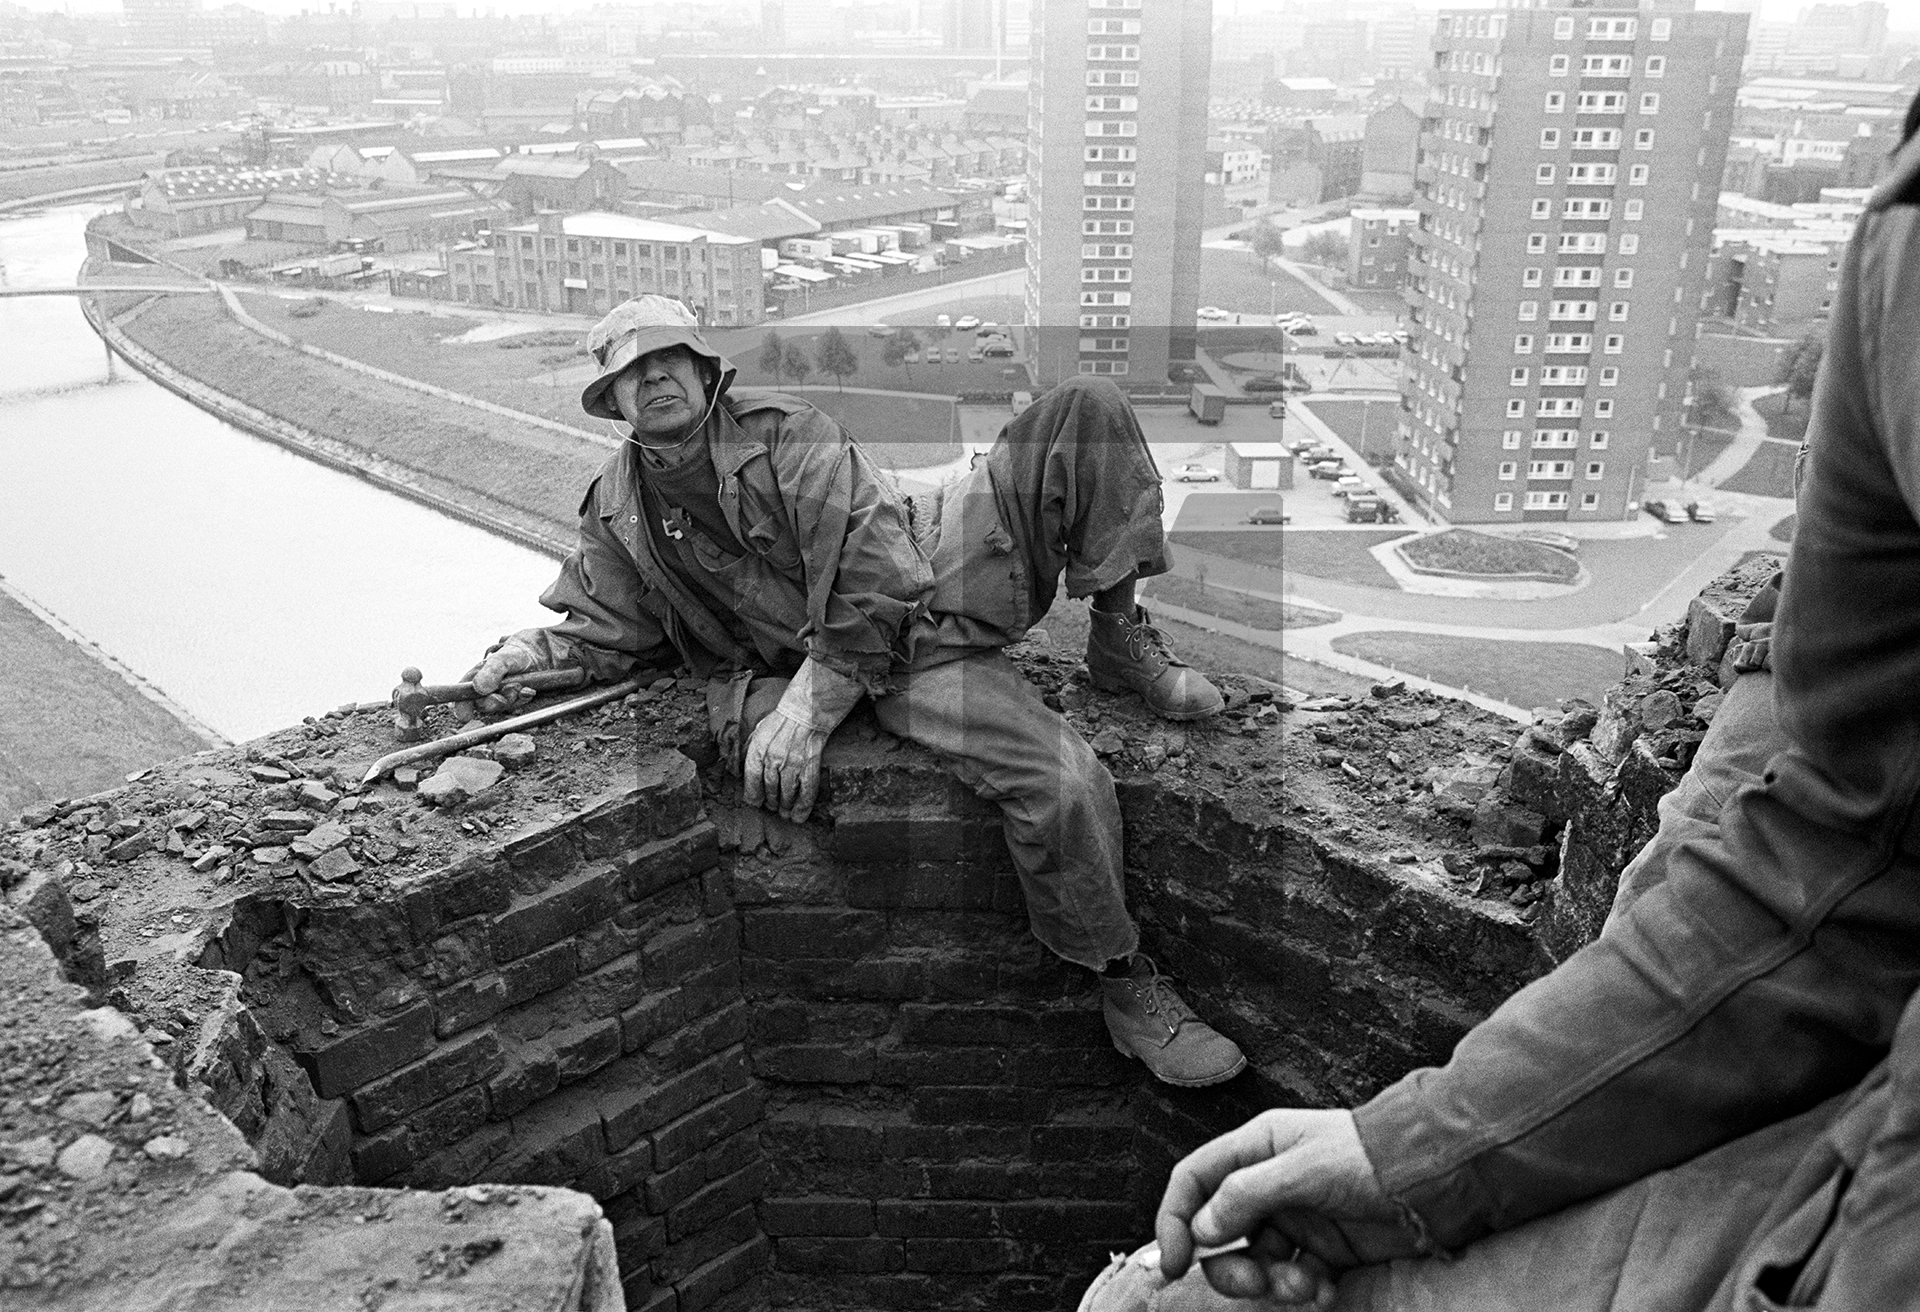 150 feet up, atop of the stack and shortly after starting the demolition process, Peter Tatham steeplejack poses for his portrait. September 1976 by Daniel Meadows